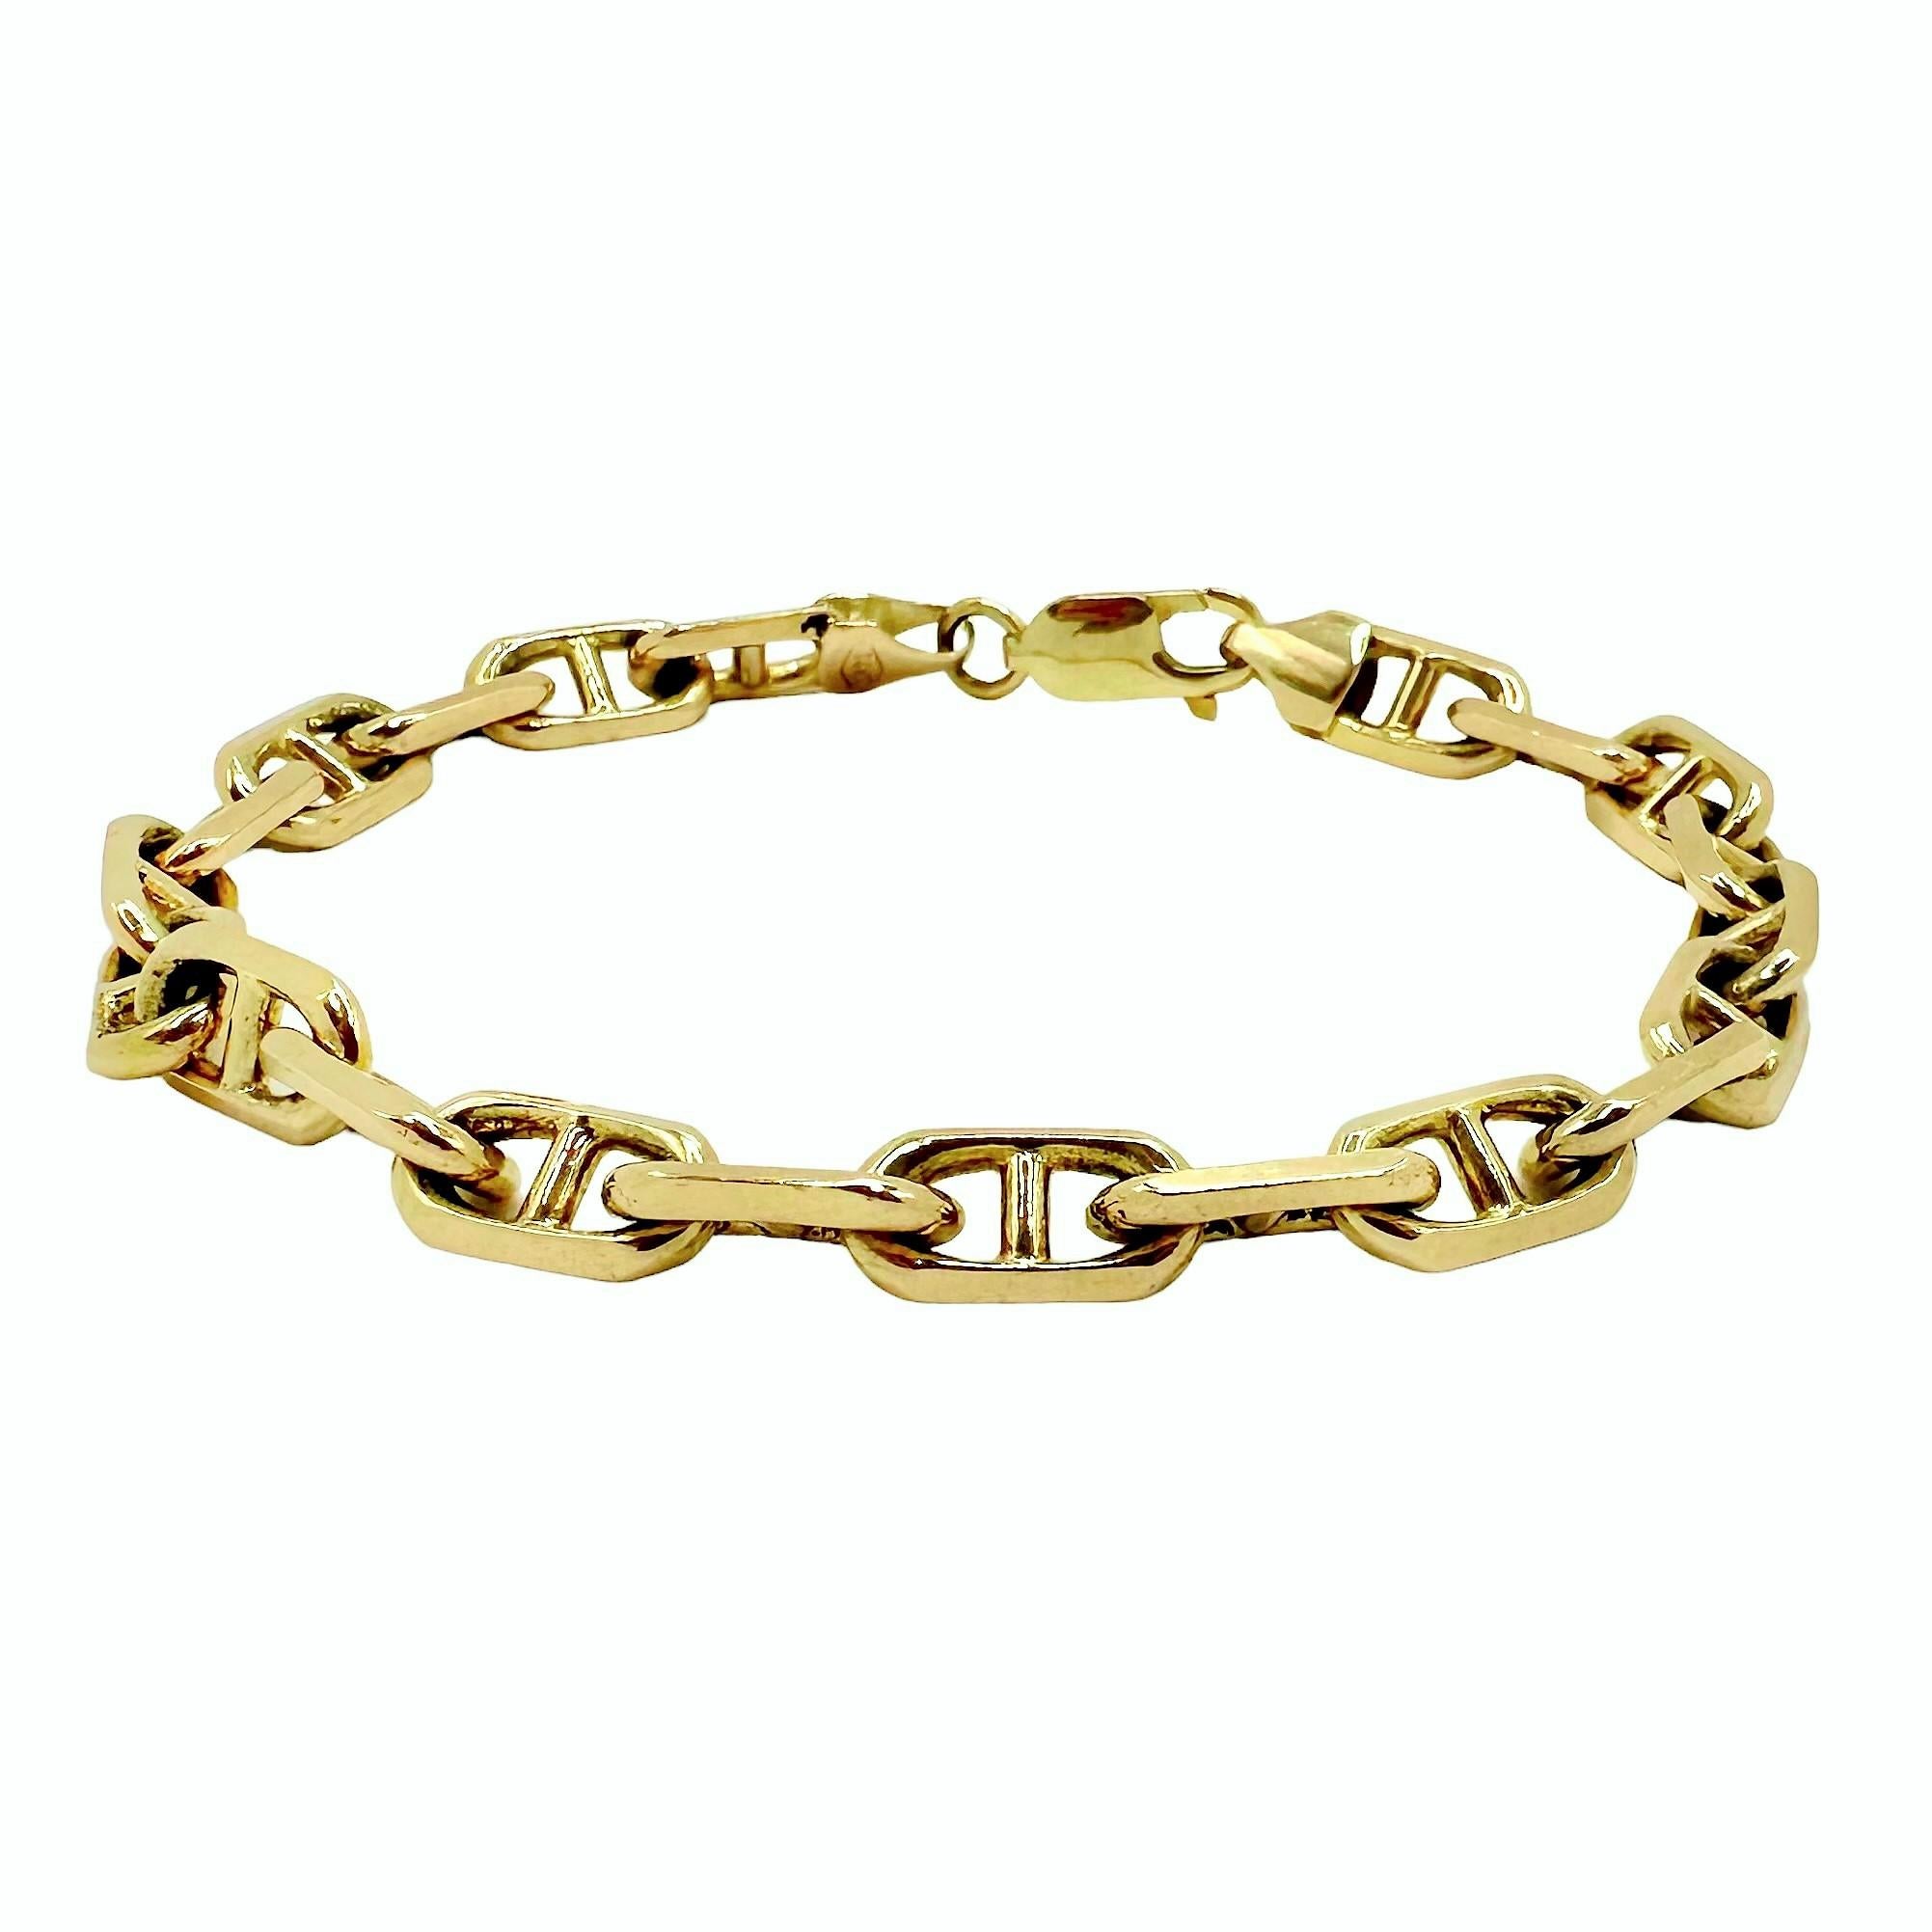 This precision crafted 14K yellow gold Italian Nautical Link bracelet equipped with lobster clasp is truly a unisex item. Worn and enjoyed by a man or woman, it is well suited for either. This bracelet is characteristic of the very high quality gold